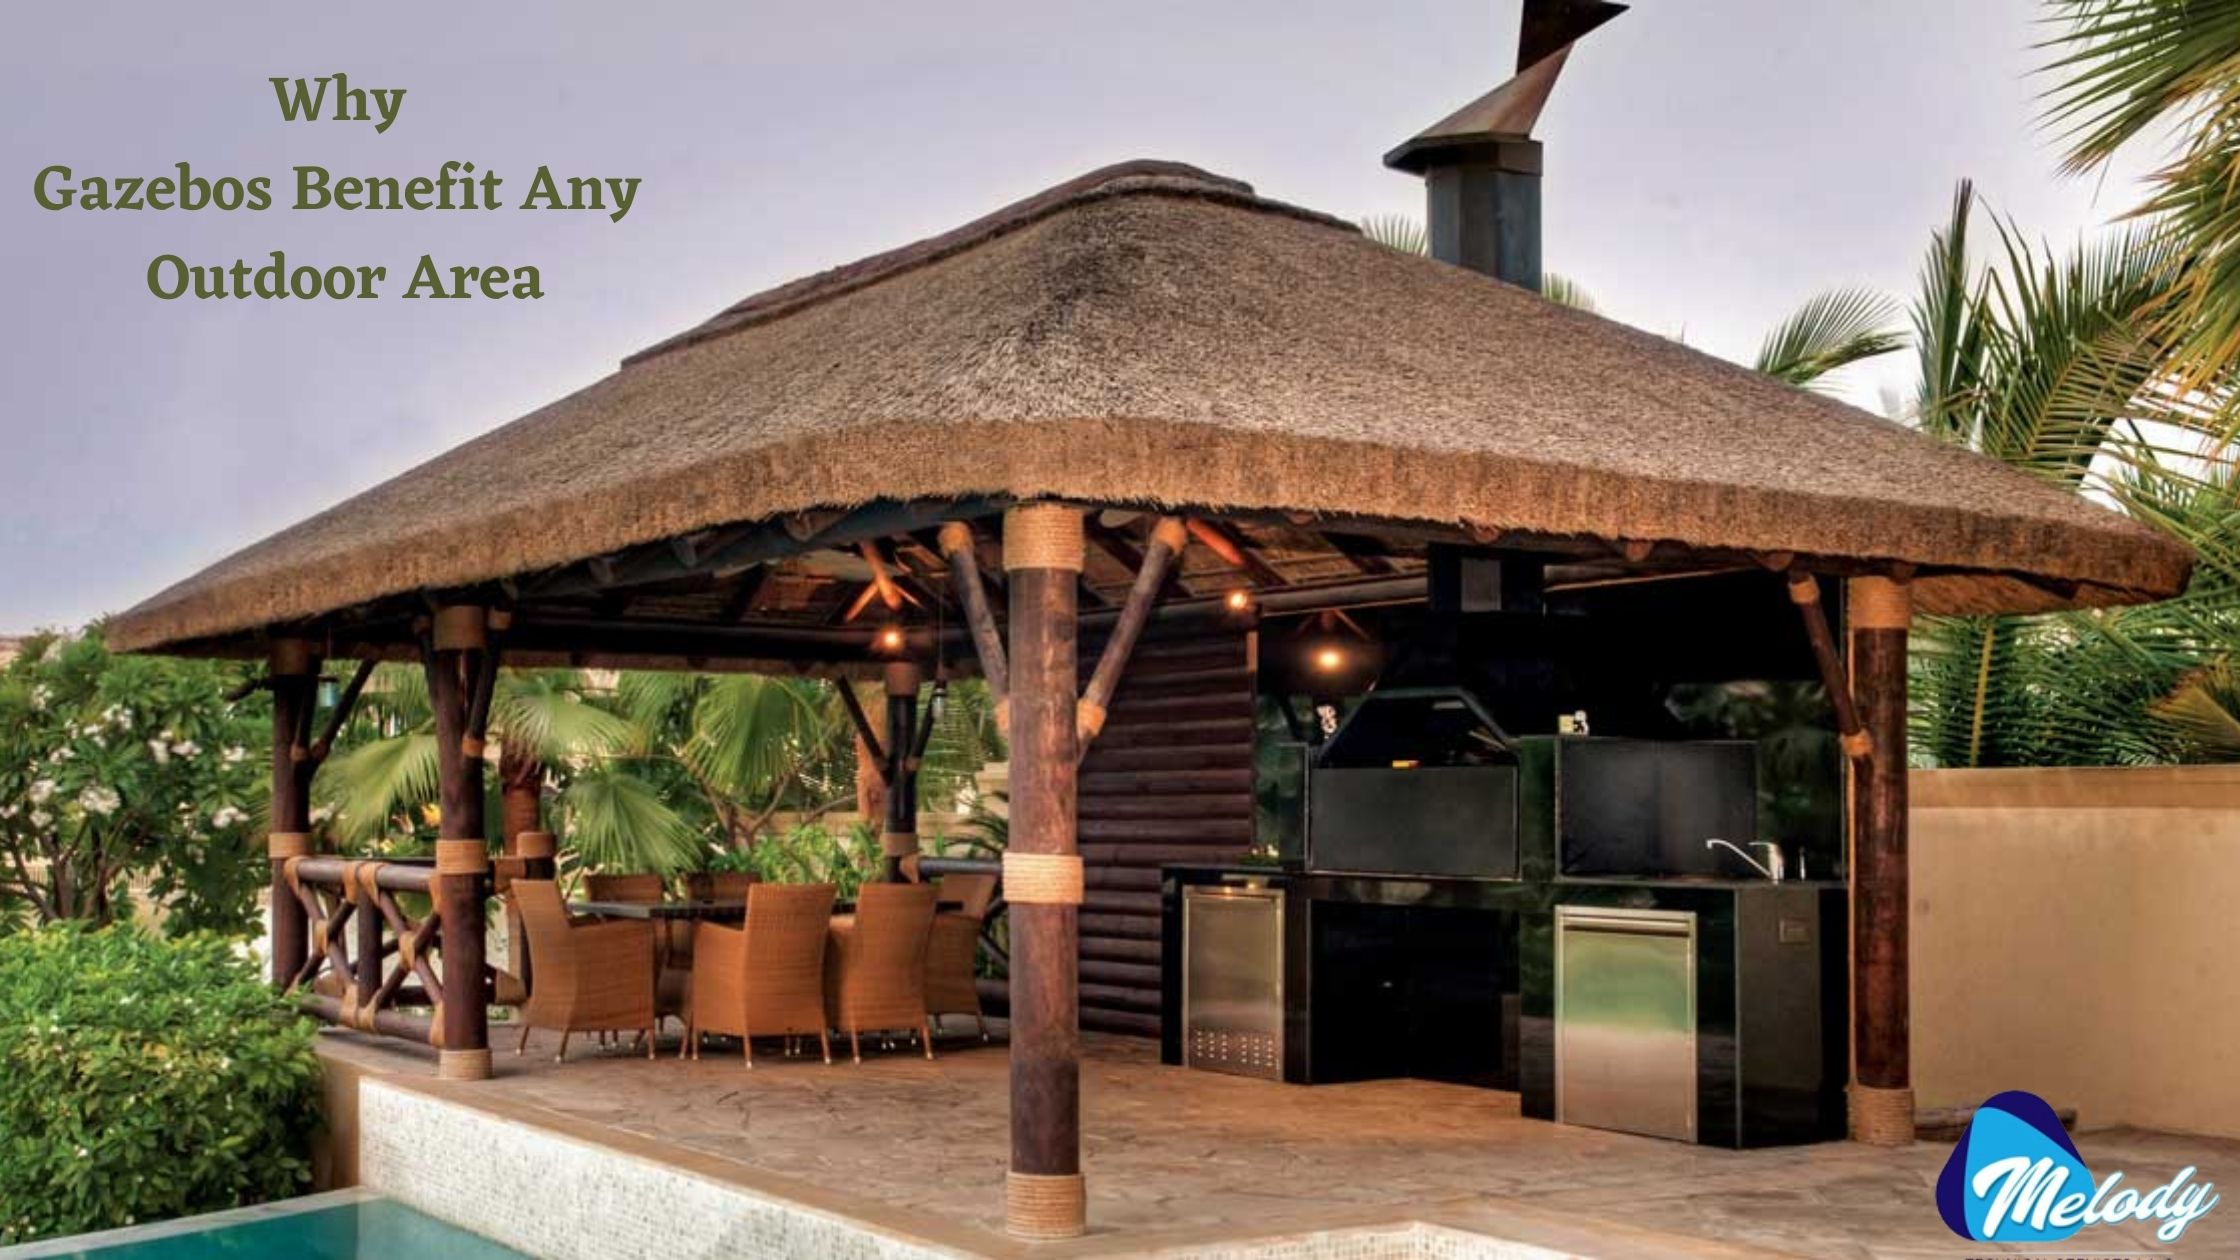 Why Gazebos Benefit Any Outdoor Area